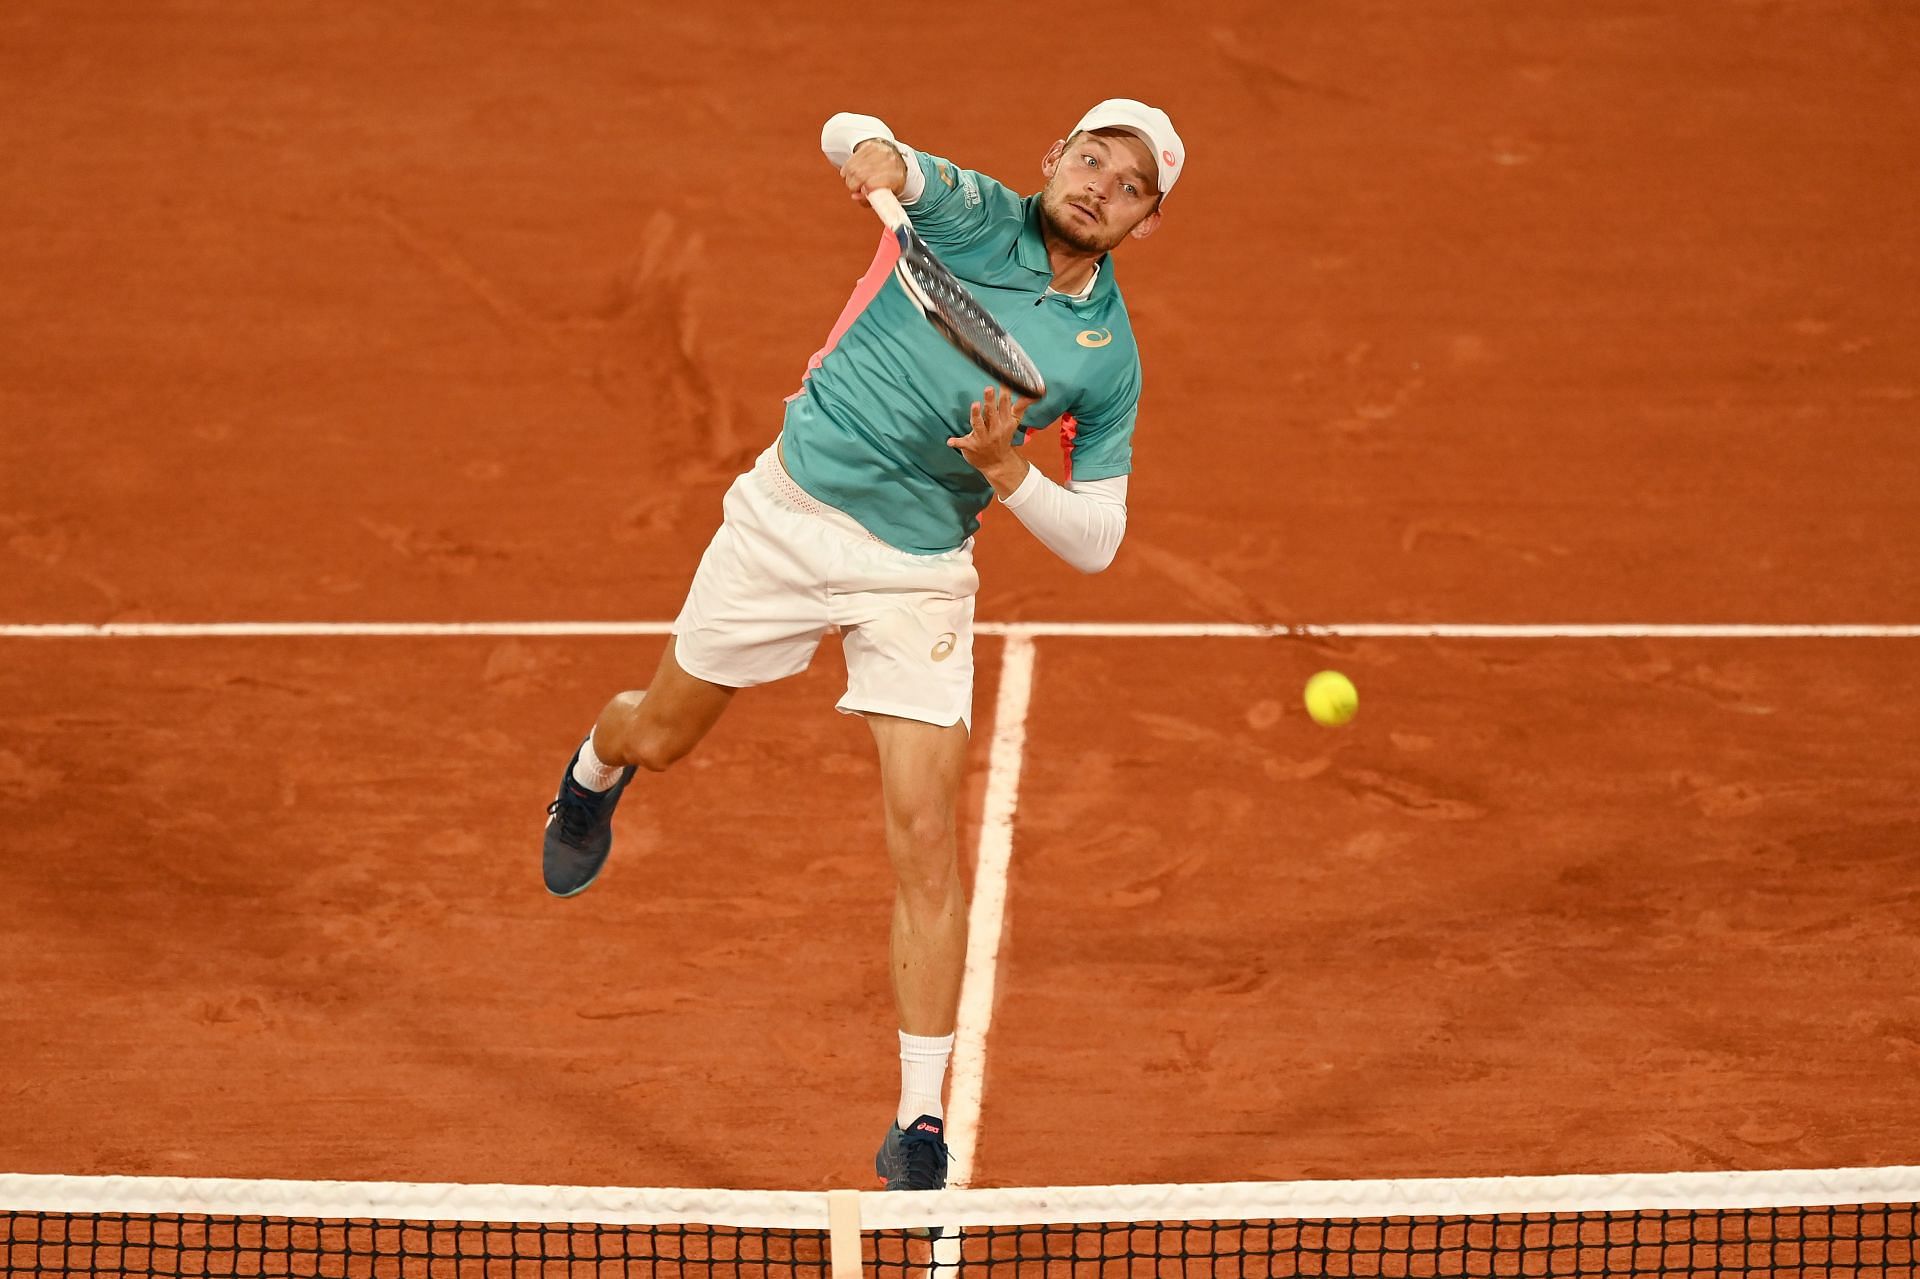 David Goffin at the 2020 French Open - Day One